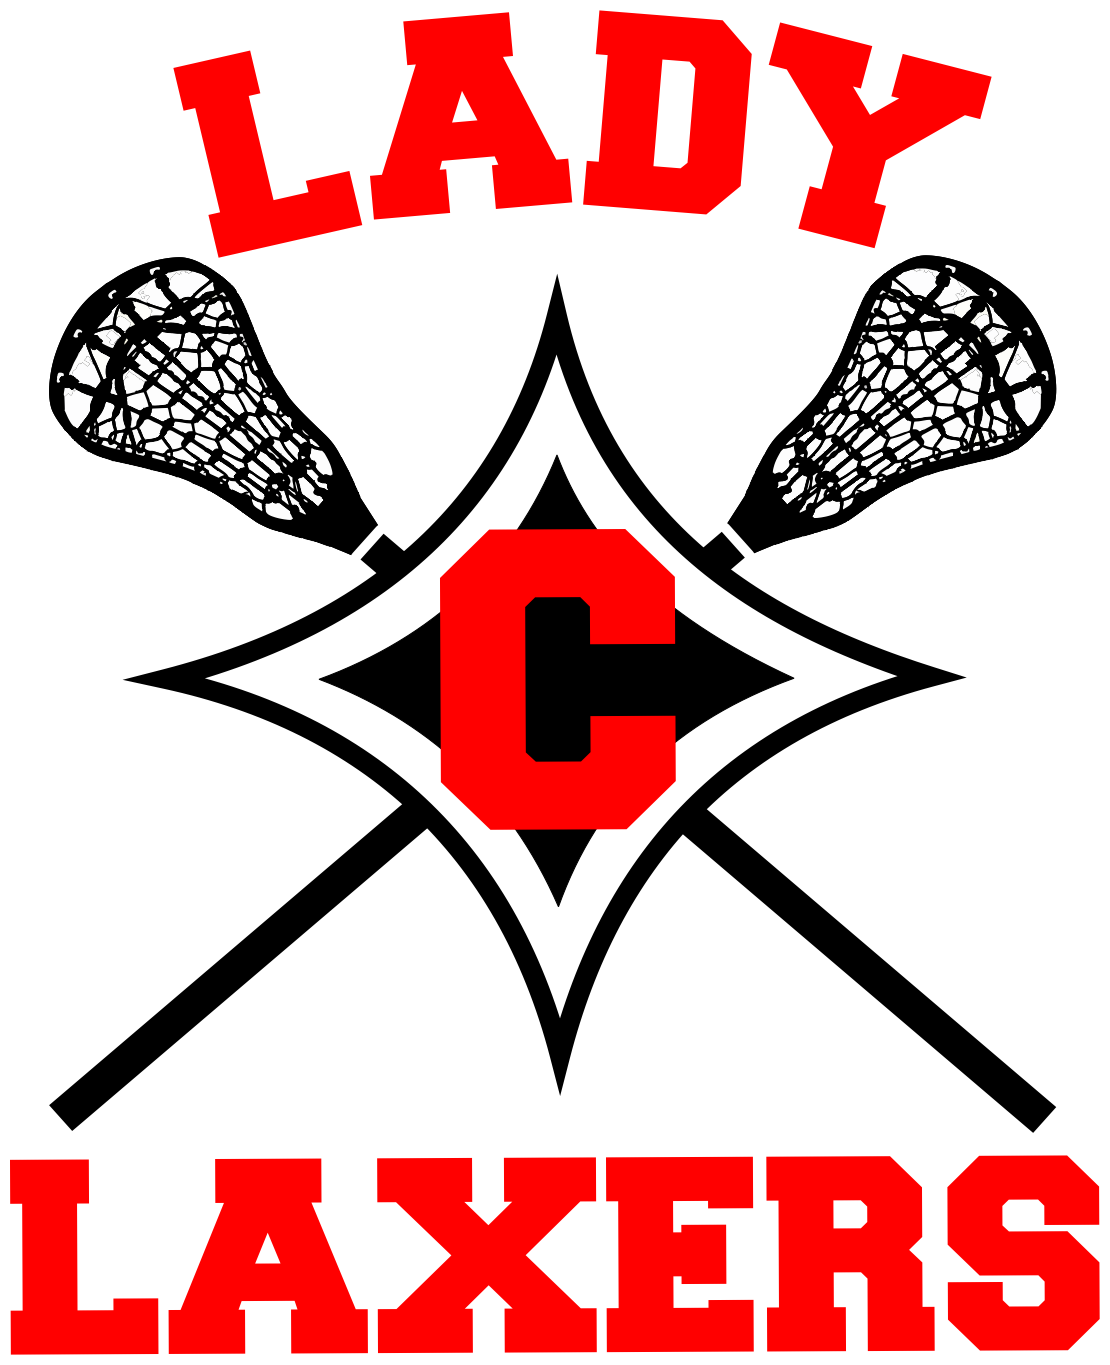  Colleyville Lady Laxers 